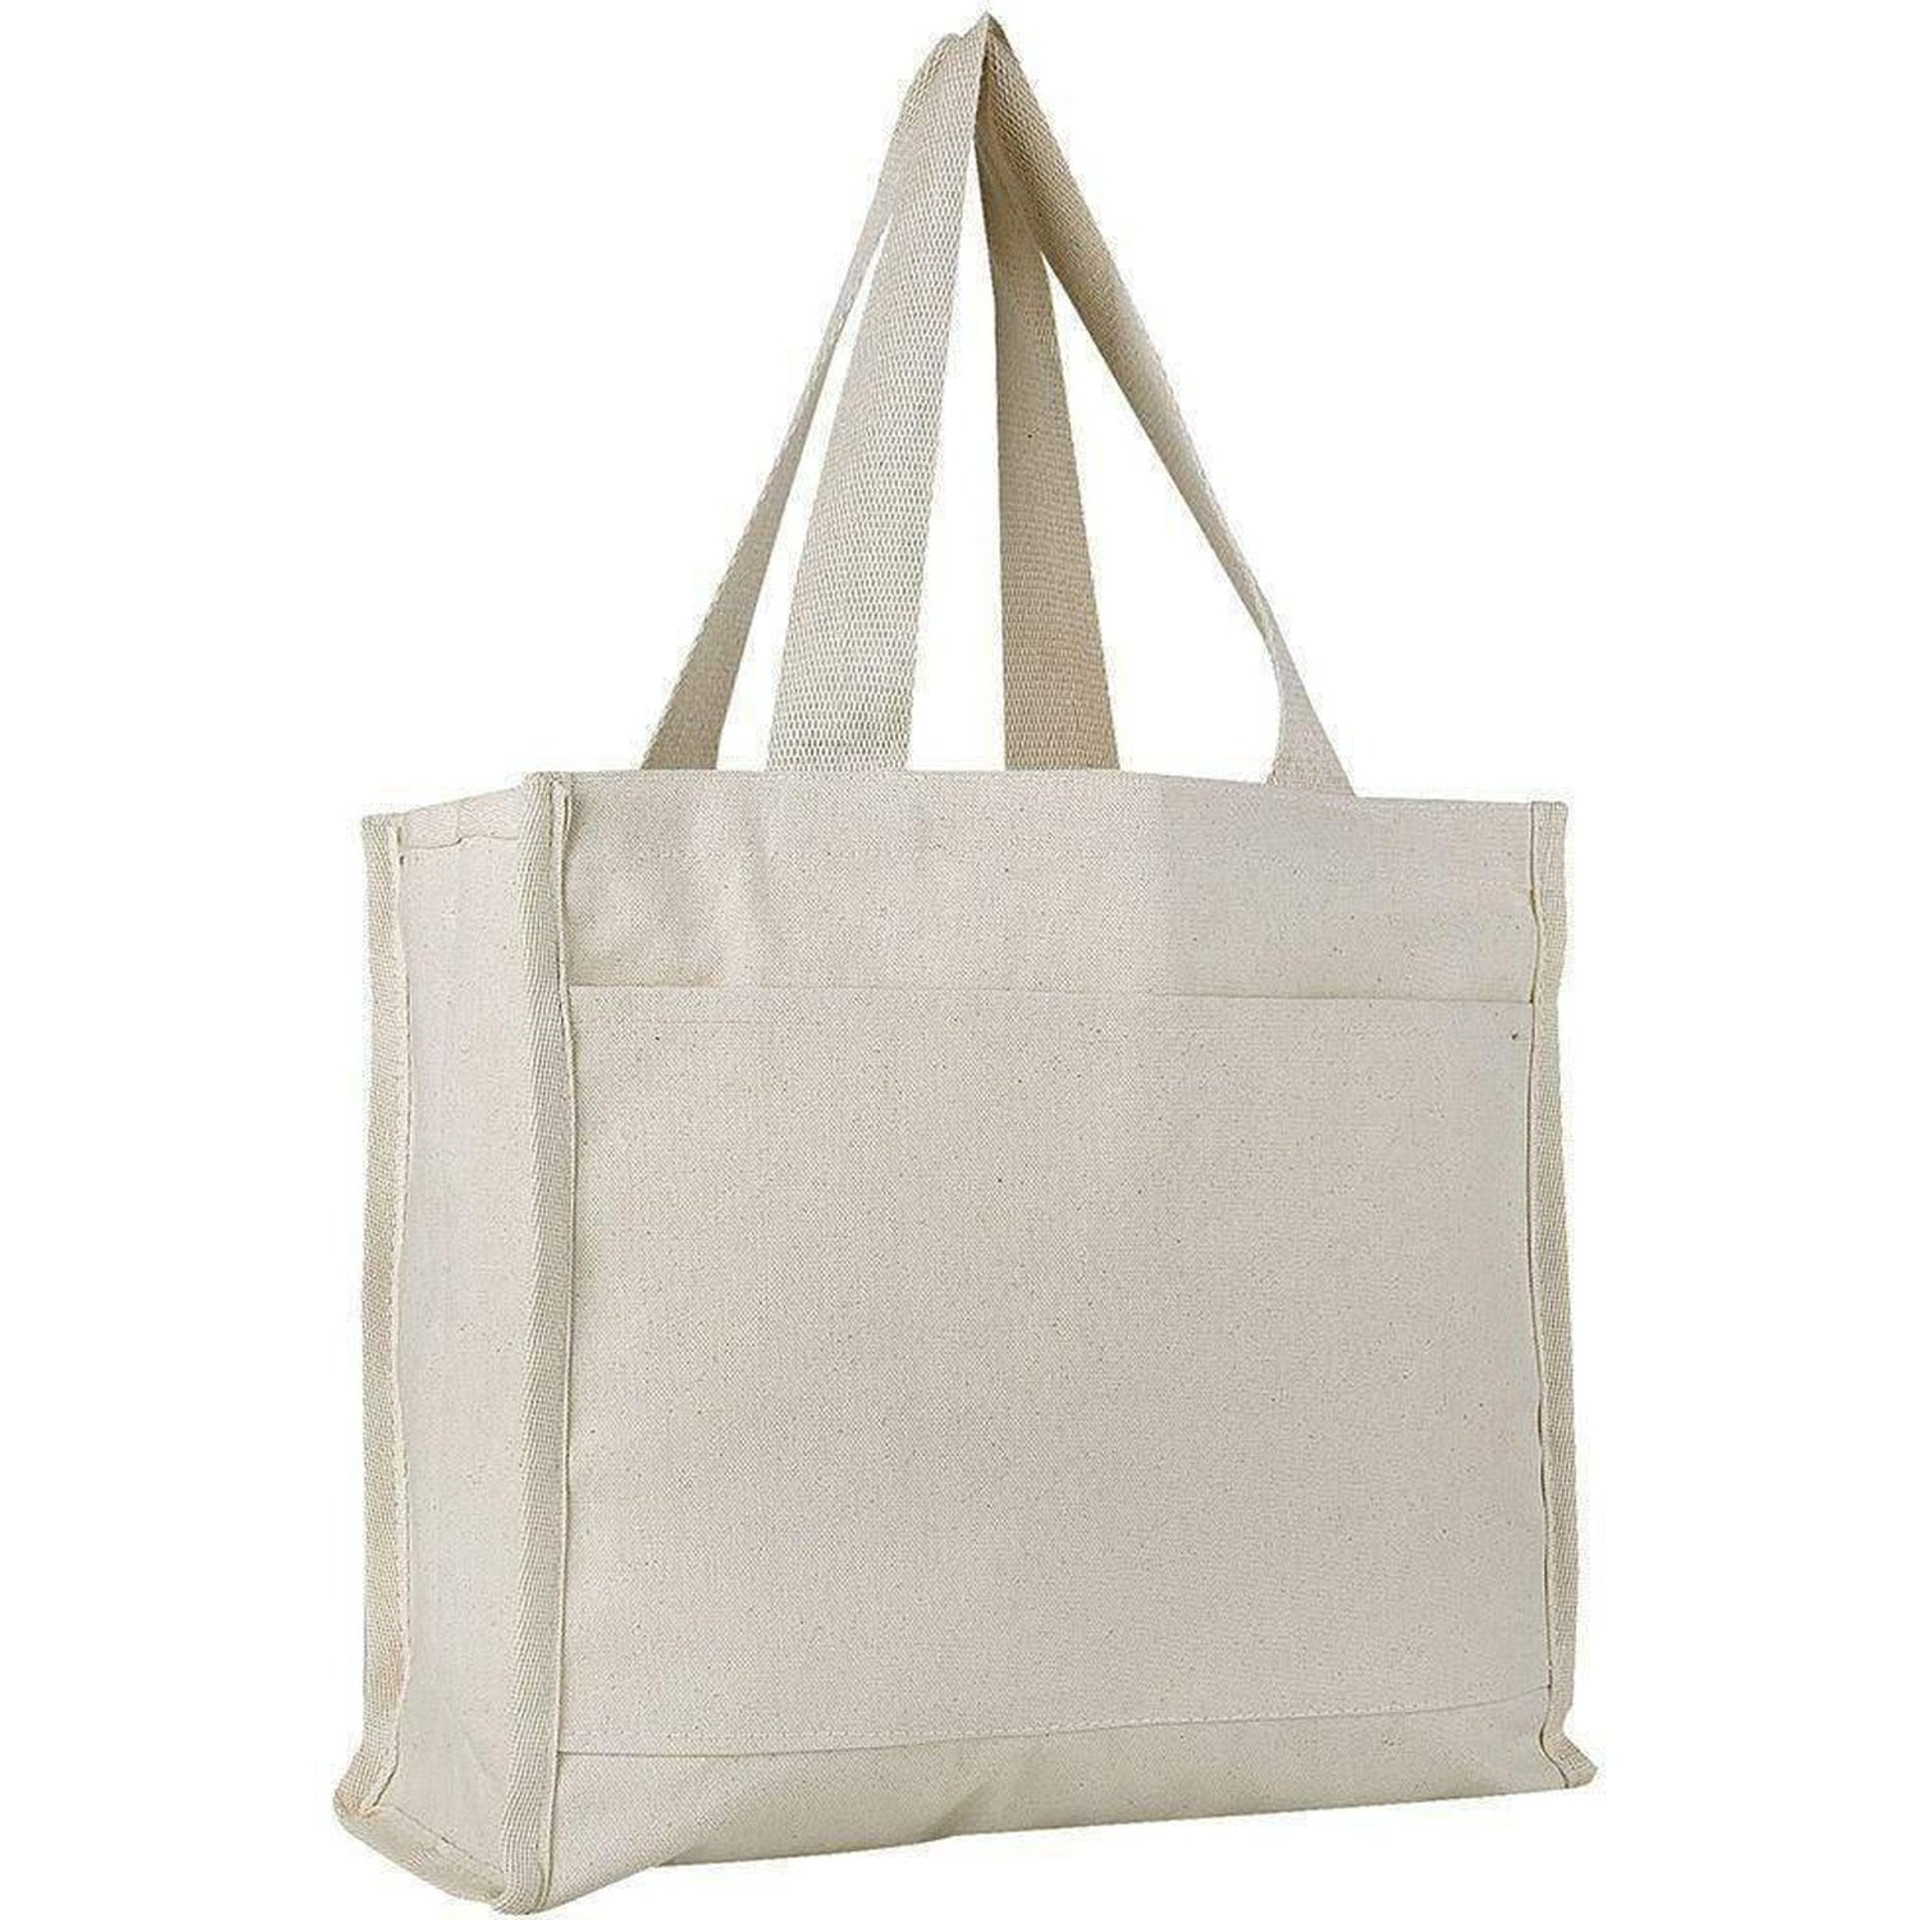 Wholesale Canvas Tote Bag - Book Bag with Gusset